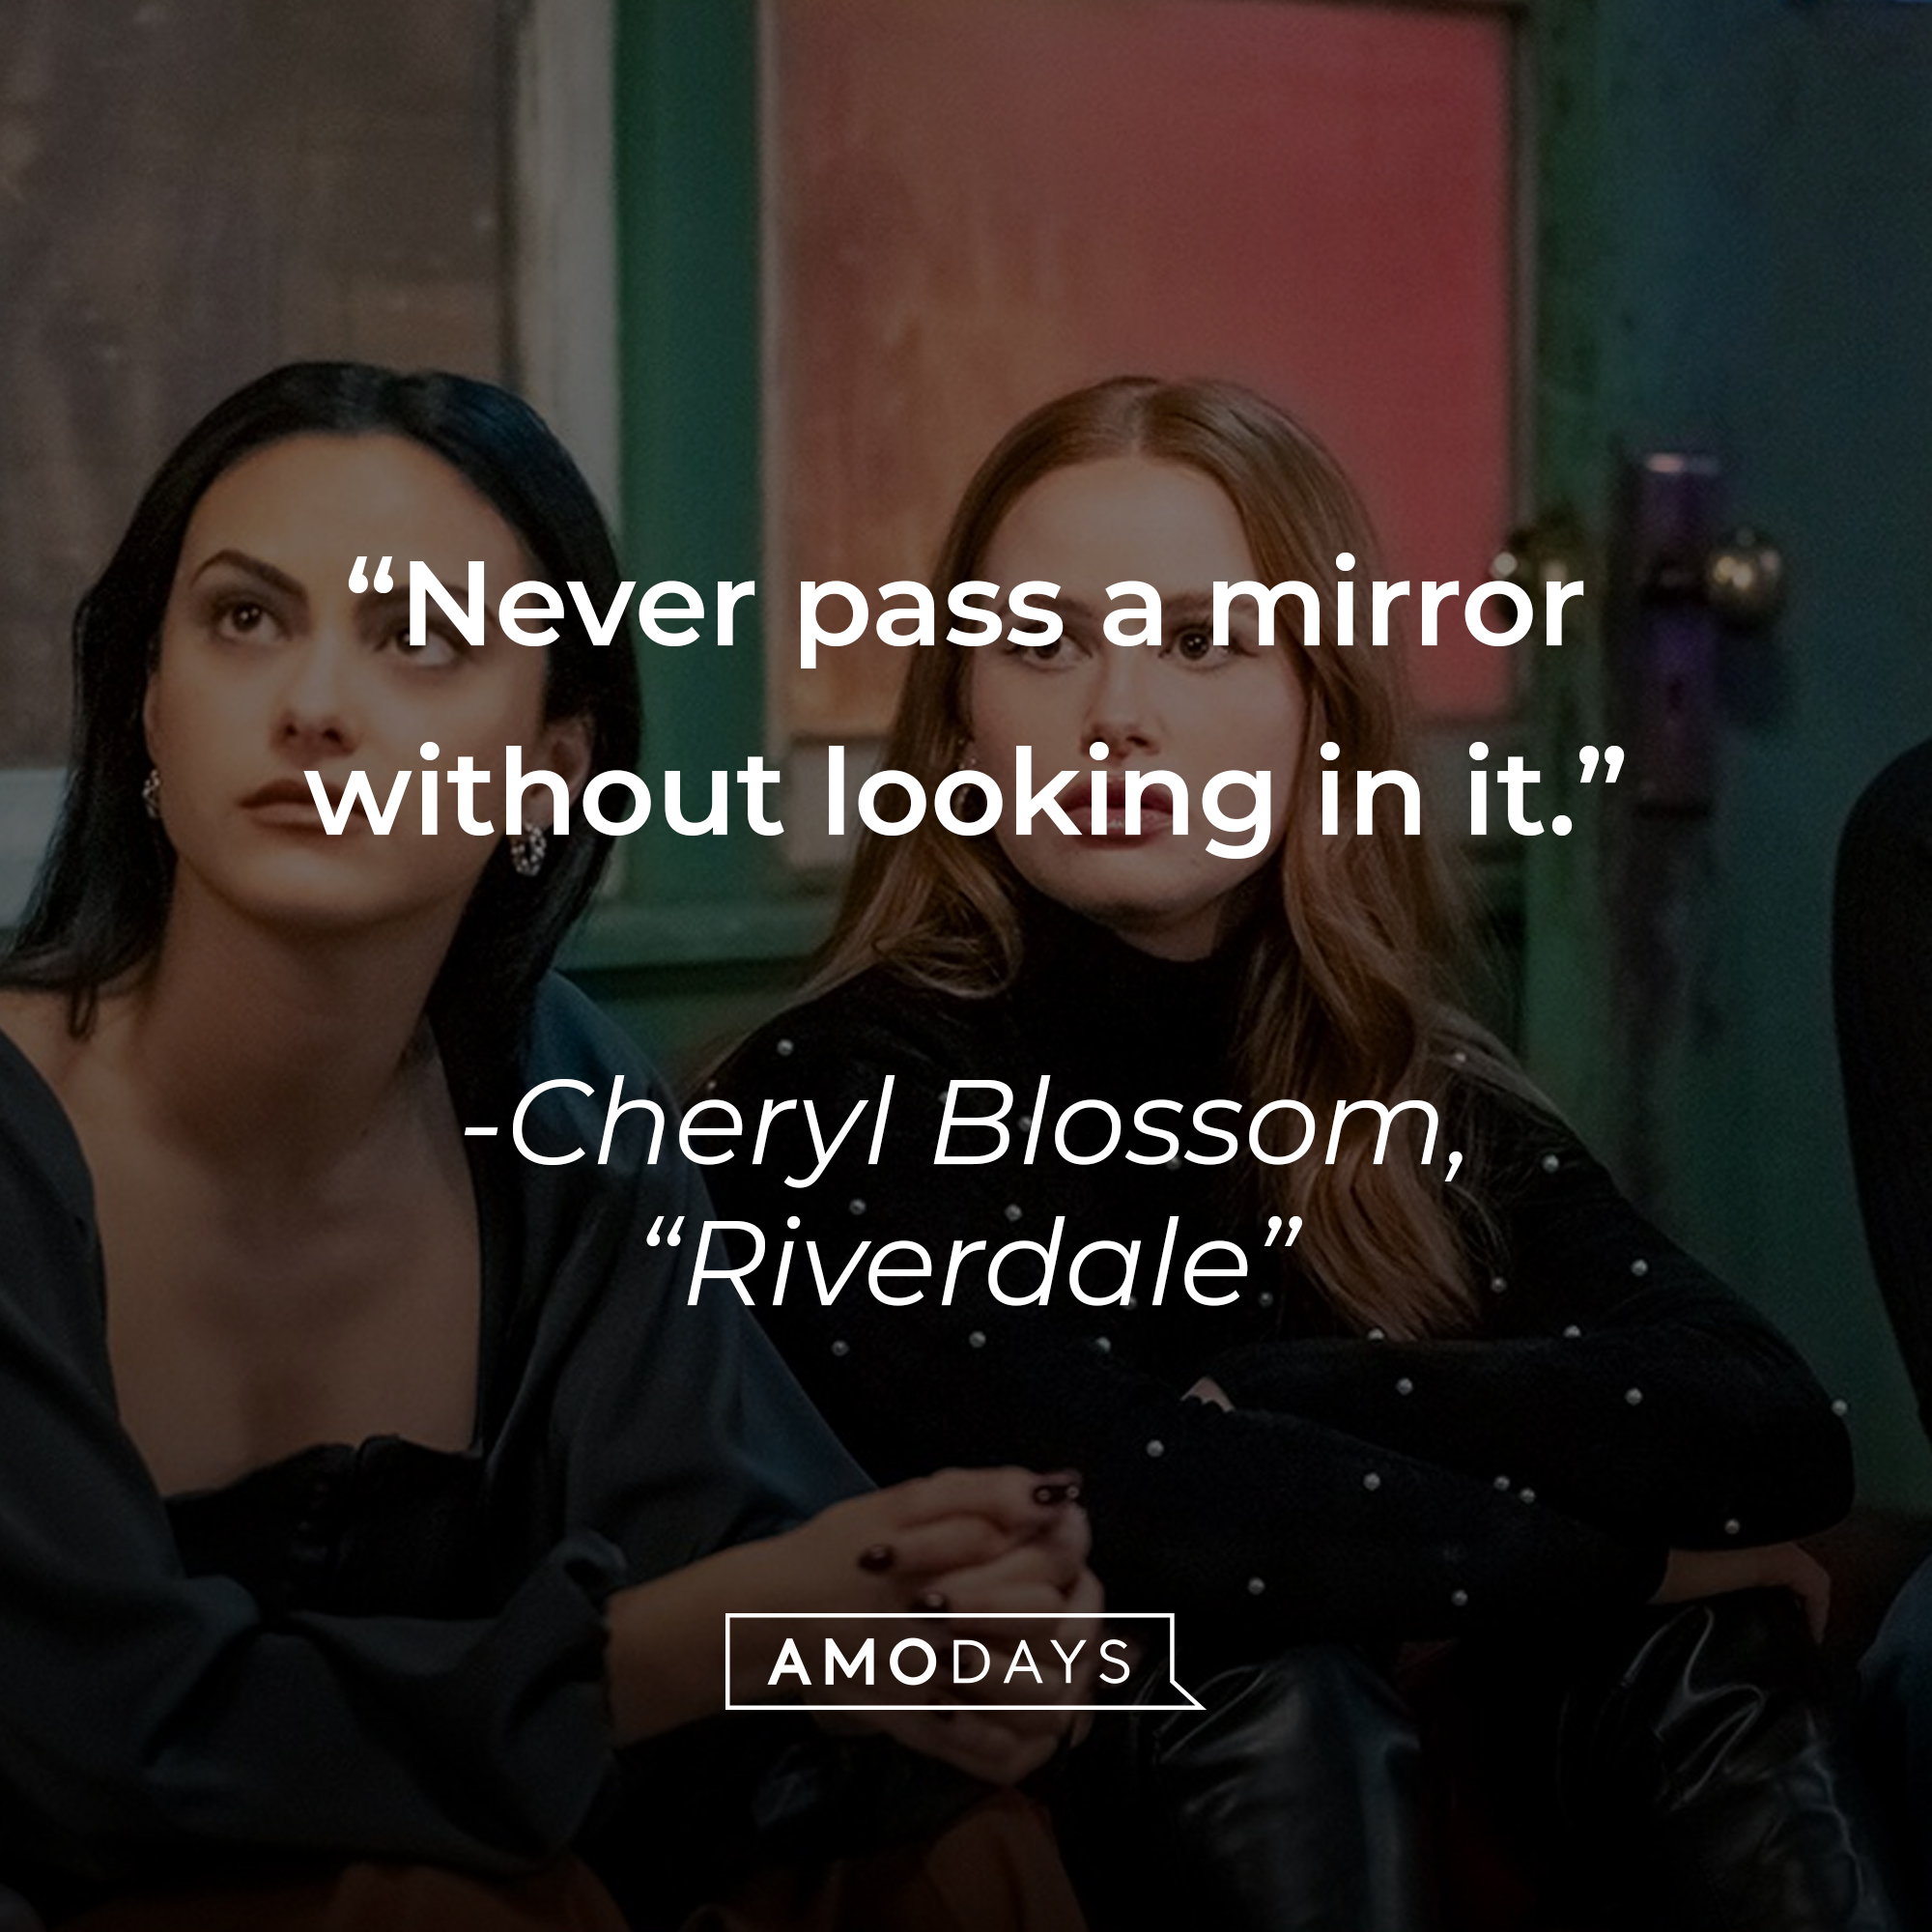 Cheryl Blossom with her quote: "Never pass a mirror without looking in it." | Source: Facebook.com/CWRiverdale